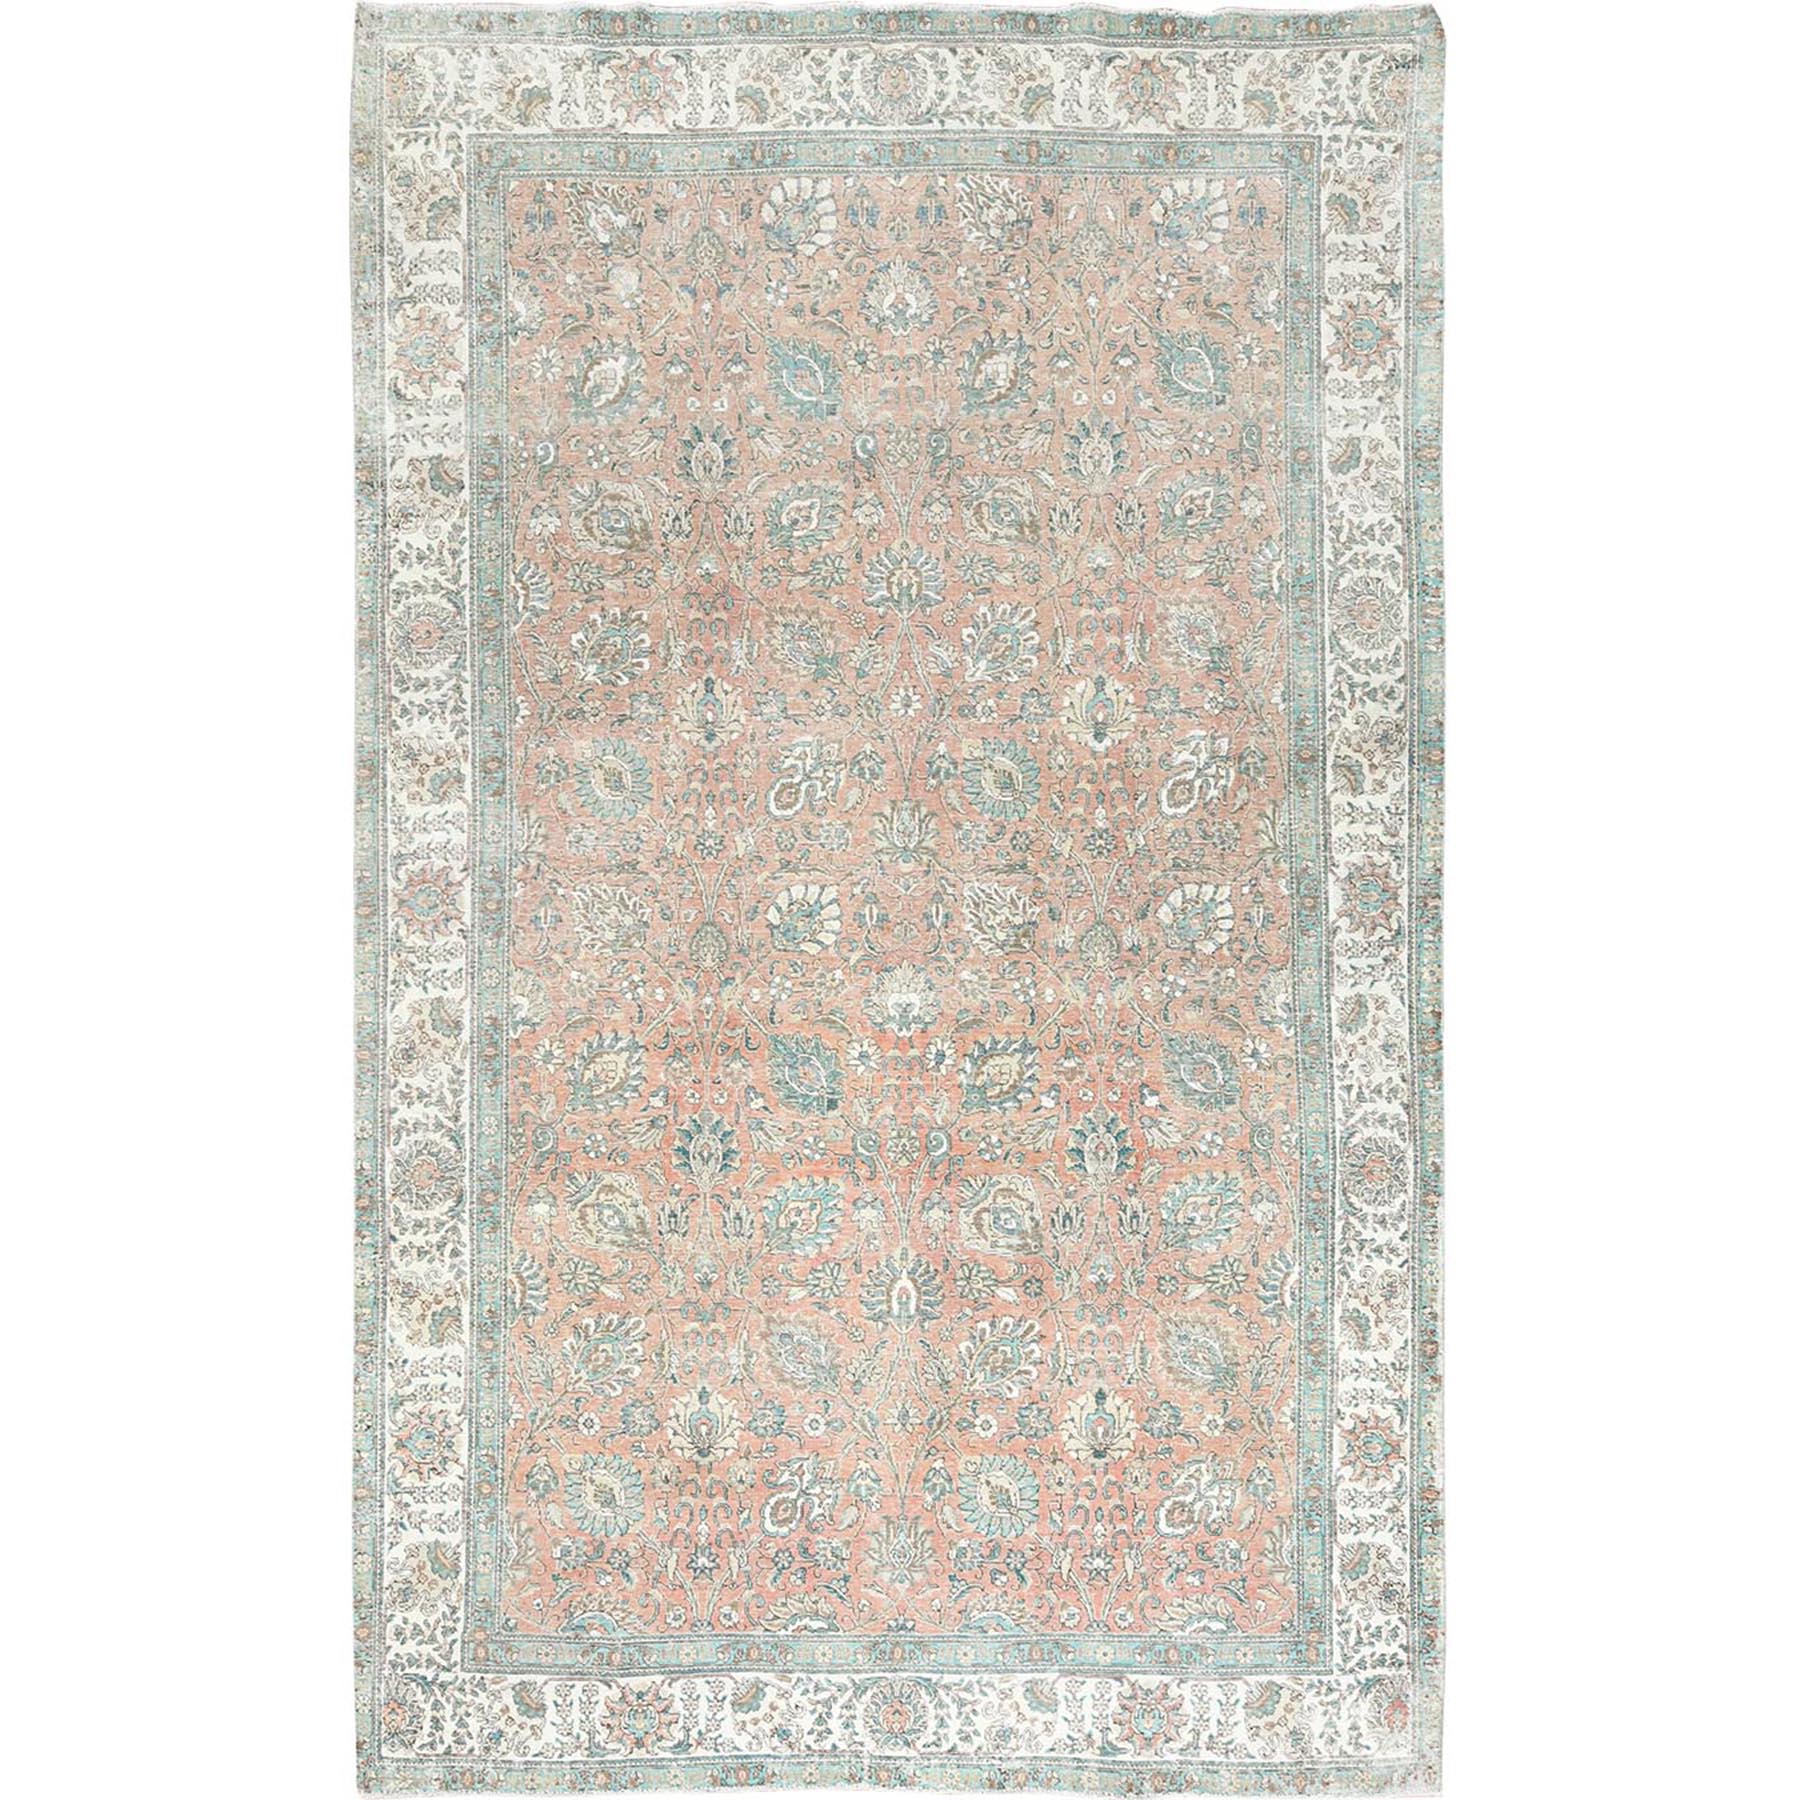  Wool Hand-Knotted Area Rug 9'7